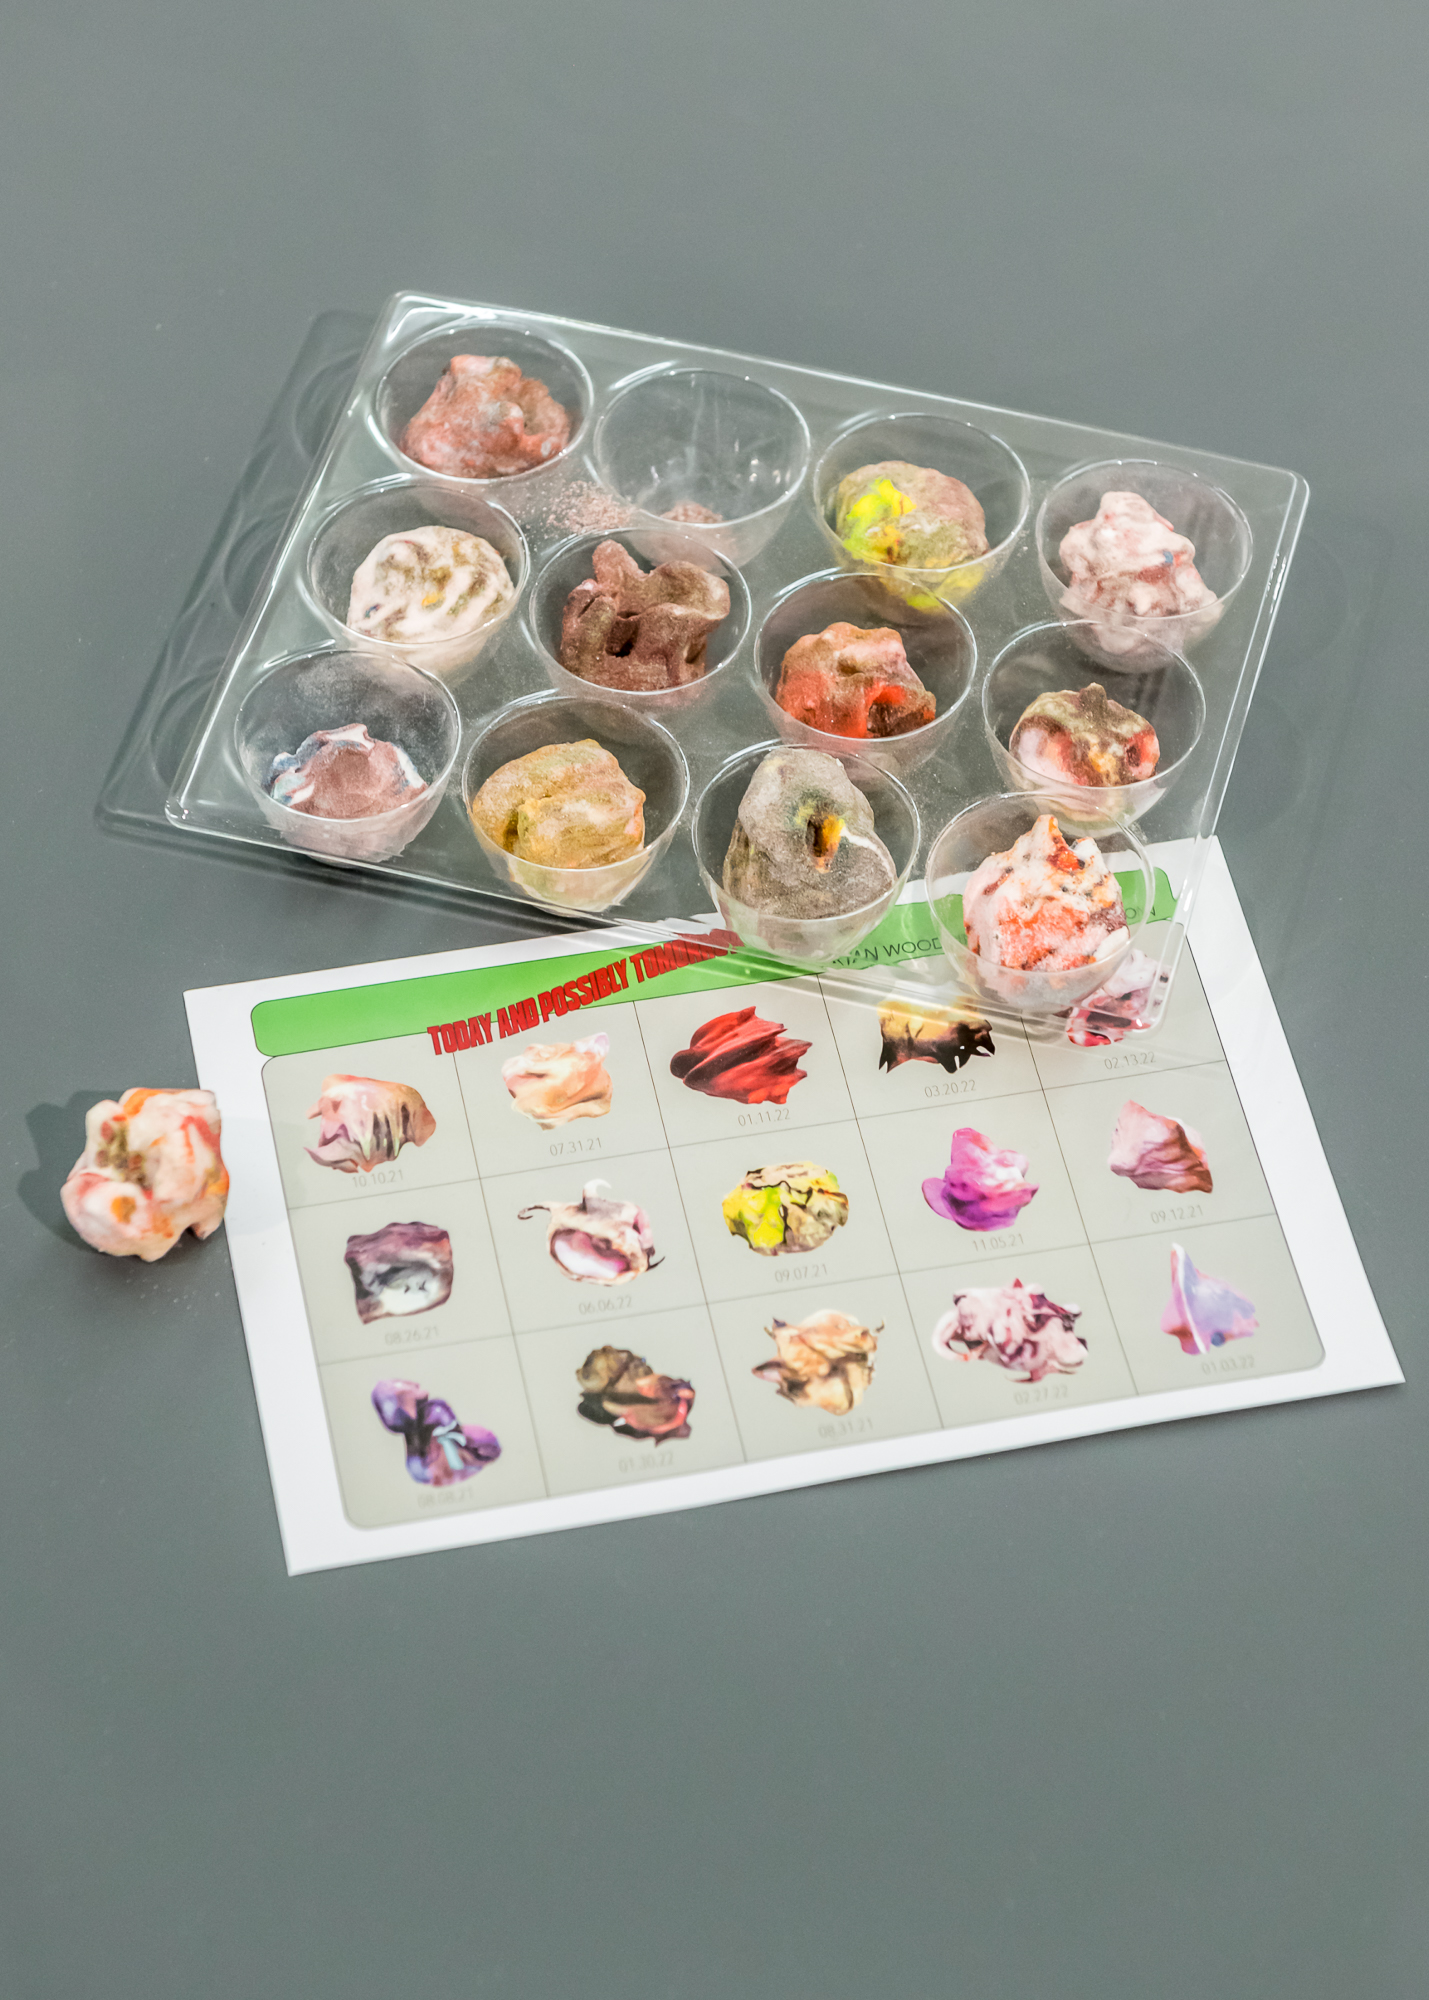 Vertically oriented overhead installation photograph at Sfaffordshire showing a plastic tray holding 11 3D-printed hard candies. Each is roughly the same volume while different in color and form. Sitting below the tray is an escaped candy and a printout detailing 30 different varieties of the candy in graphic form, each of them with the date of its inception beneath it.